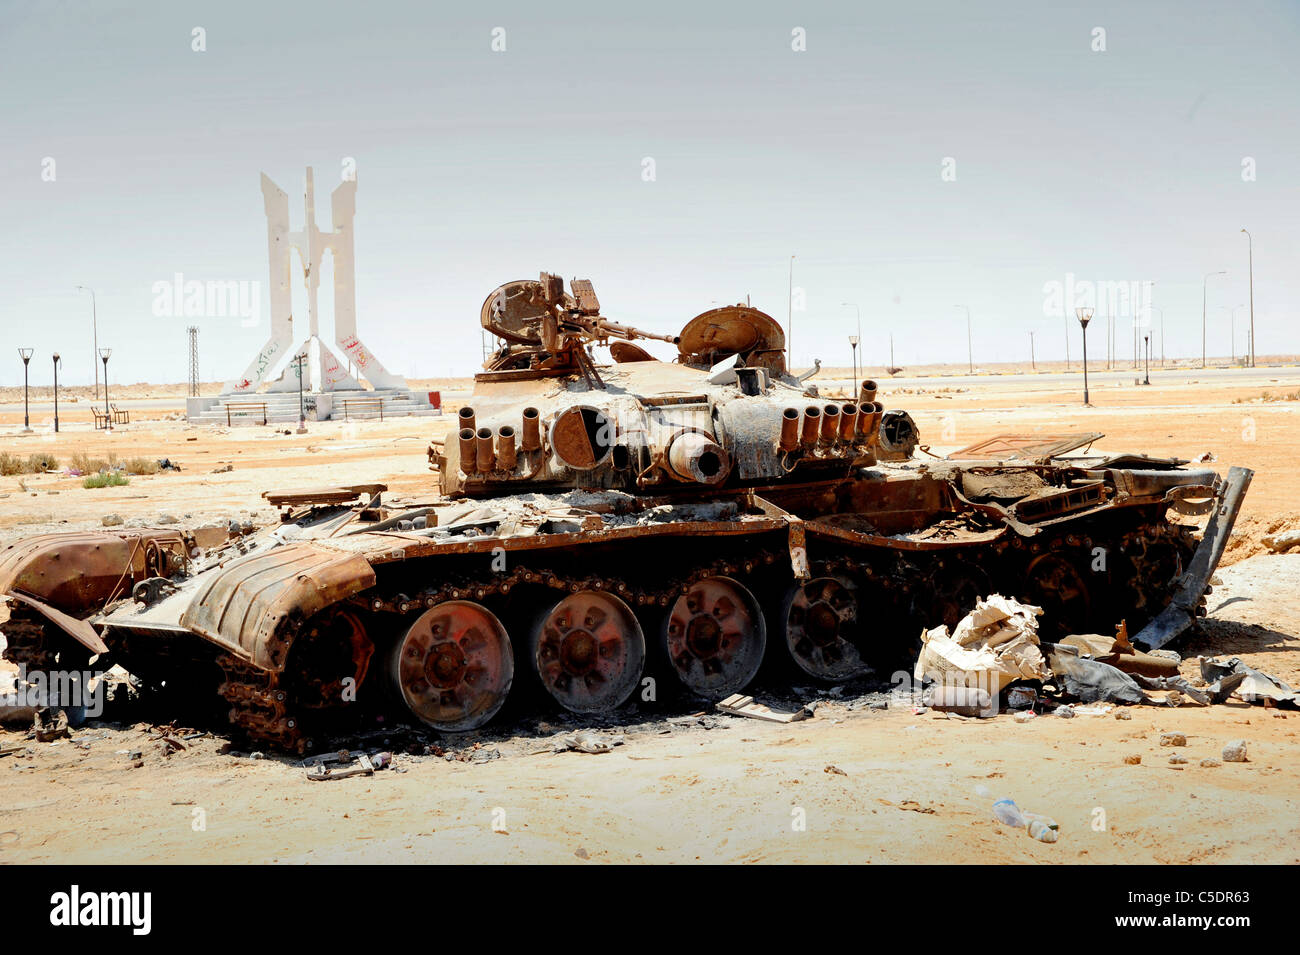 a-blow-up-destroyed-t80-tank-in-the-libya-desert-C5DR63.jpg